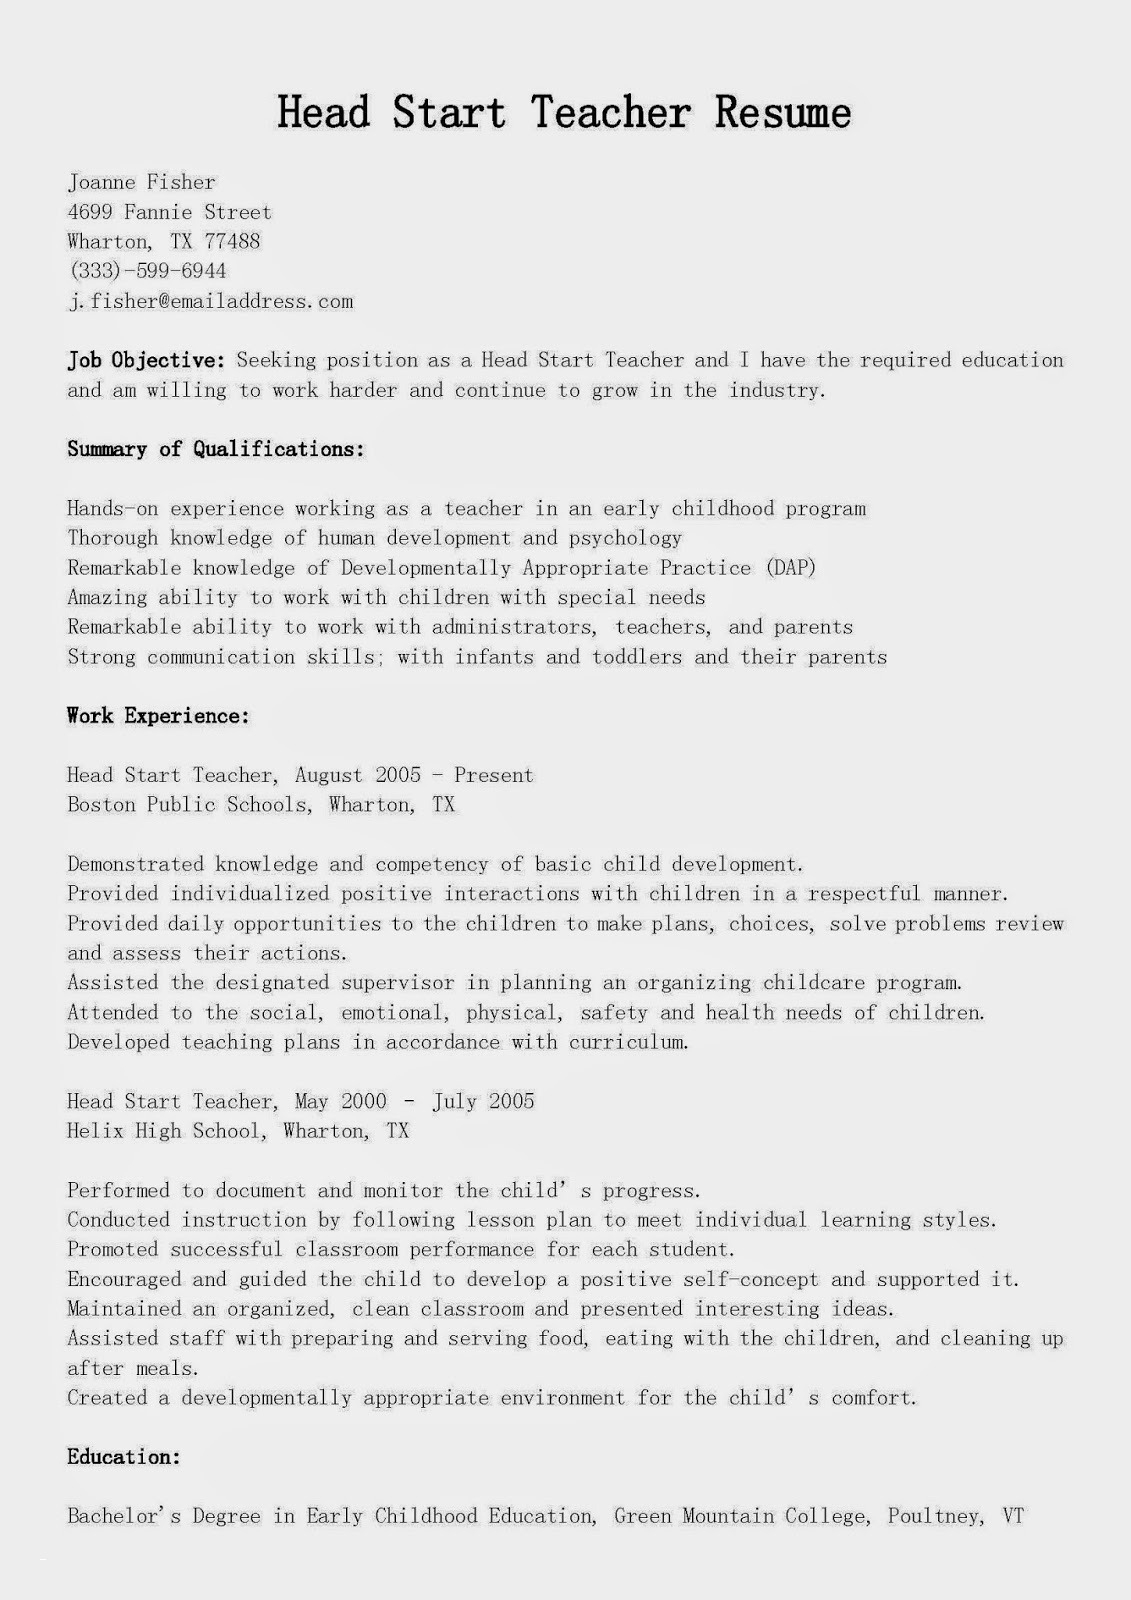 Expert Opinion Letter Template - Resume Example for Students Best Example A Cover Letter for